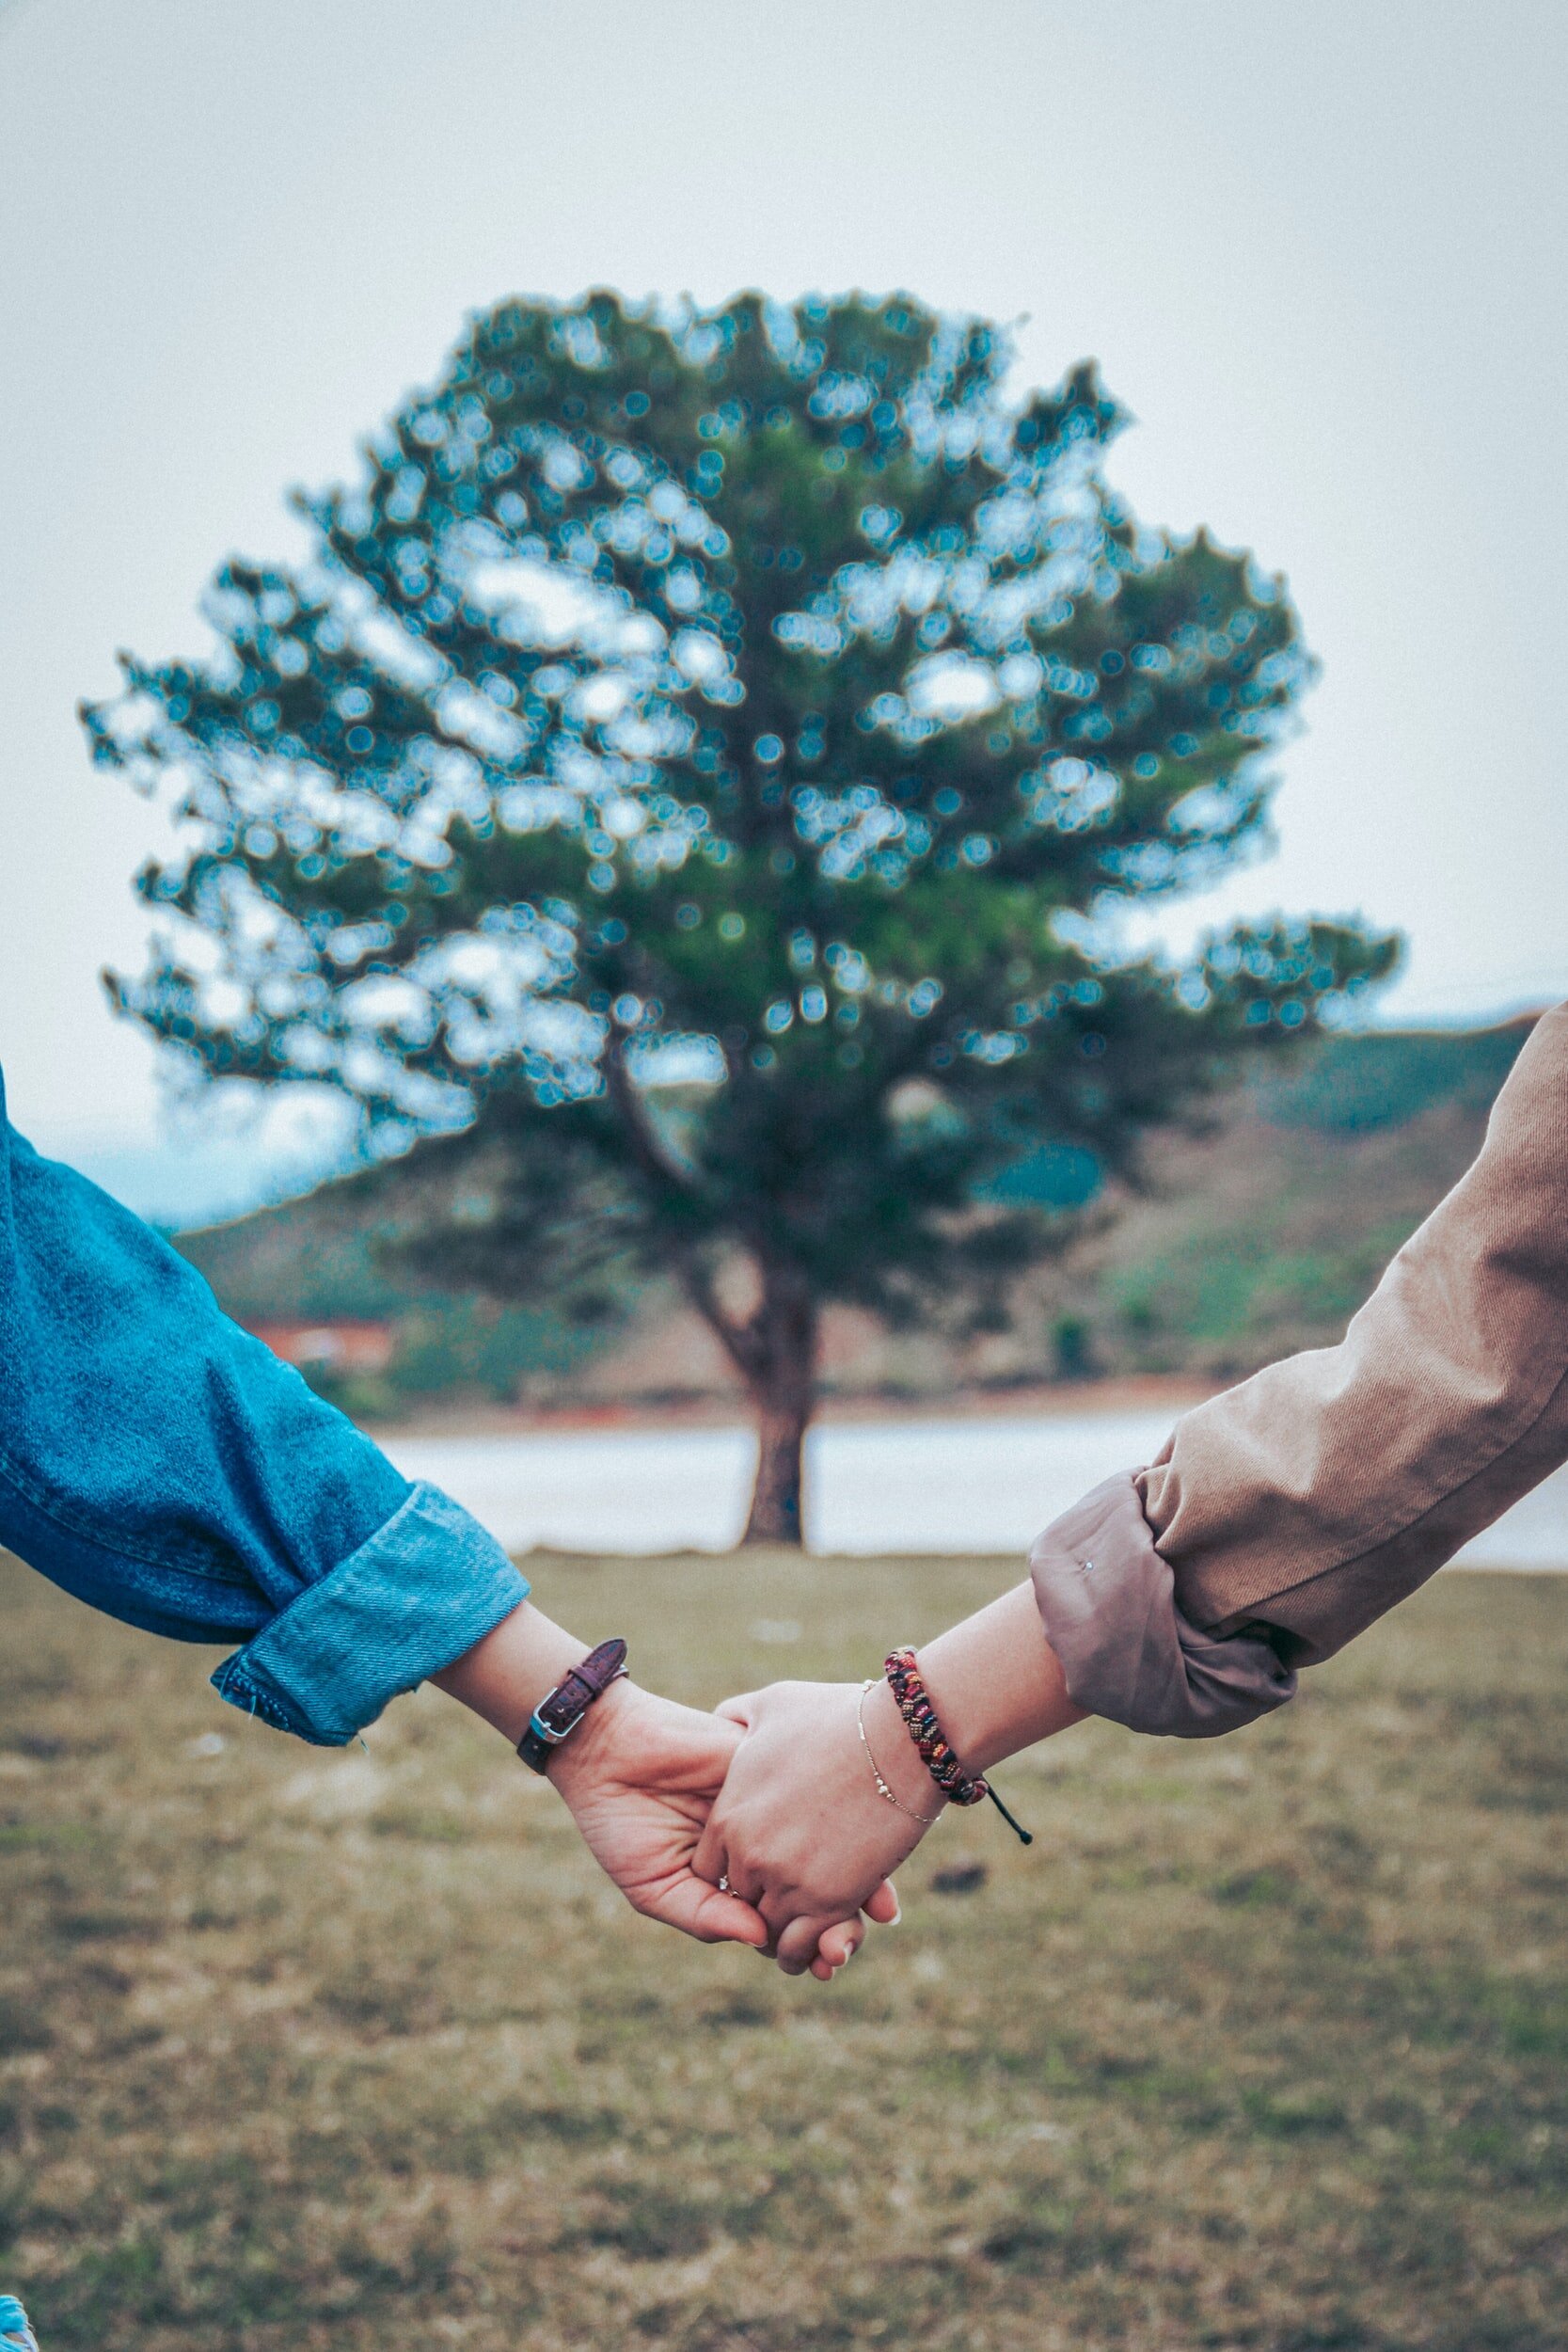 Image by Duong Huru on Unsplash Two people hold hands.